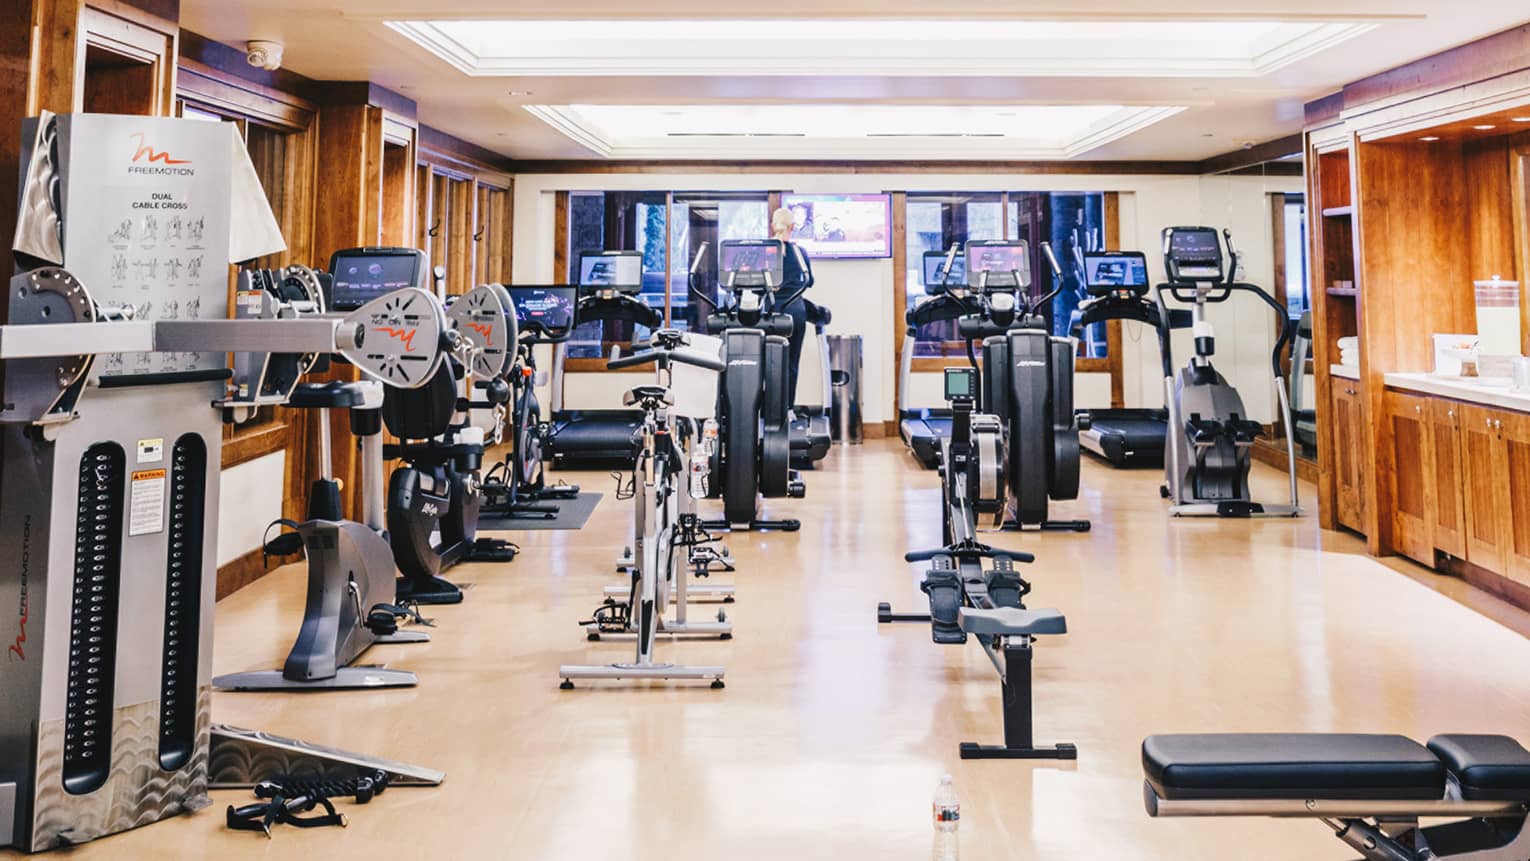 A spacious indoor fitness center filled with various exercise equipment